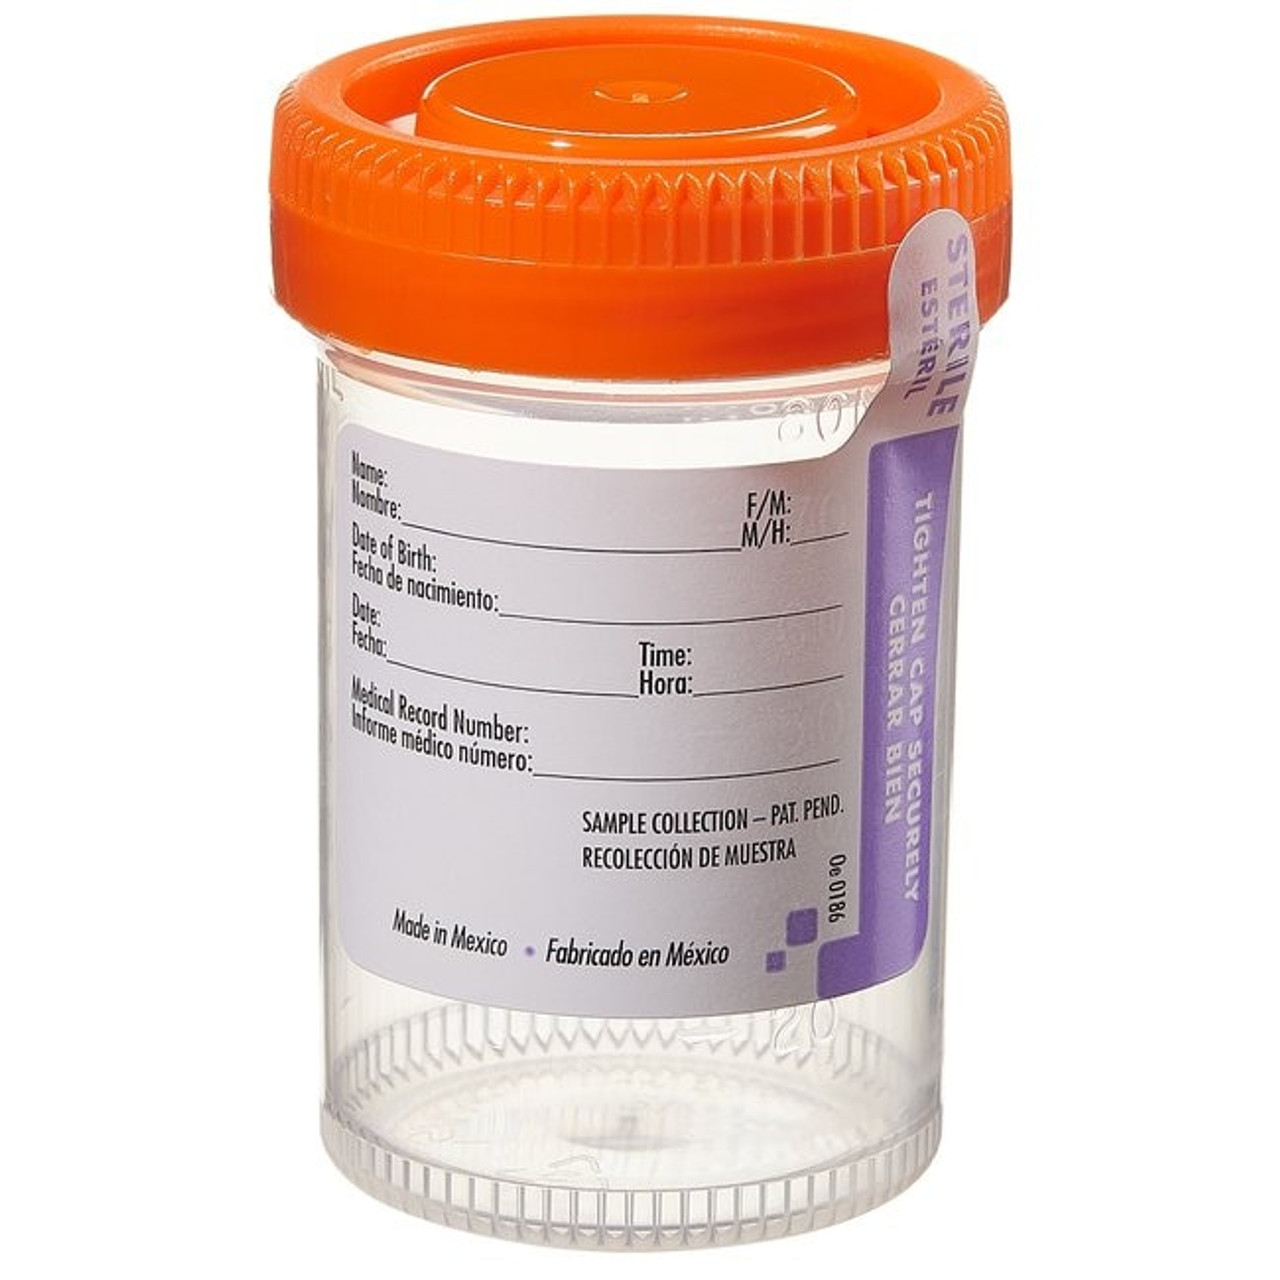 Corning Snap-Seal Disposable Plastic Sample Containers:Clinical Specimen